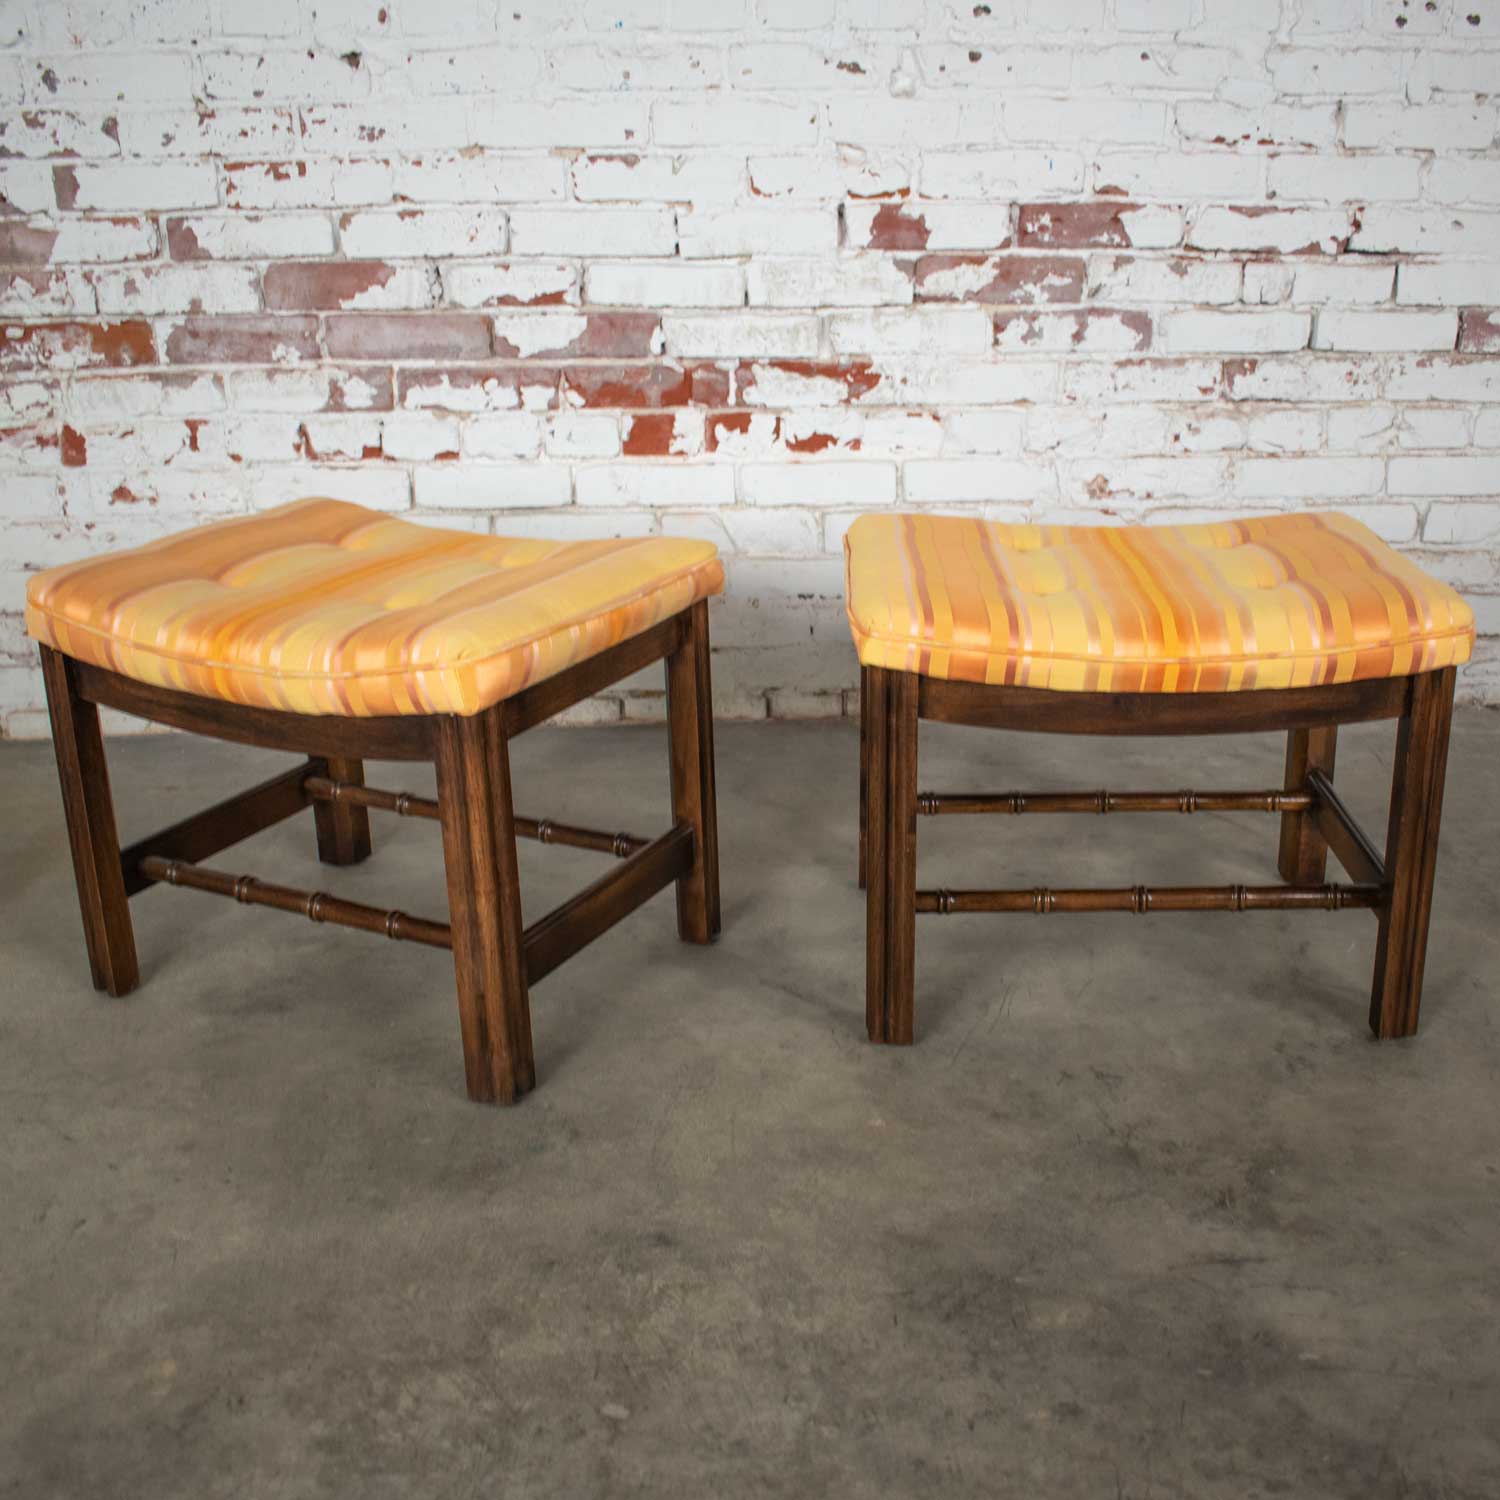 Chinese Chippendale Pair Foot Stools in Orange & Yellow Stripe Upholstery by Burlington House Furniture